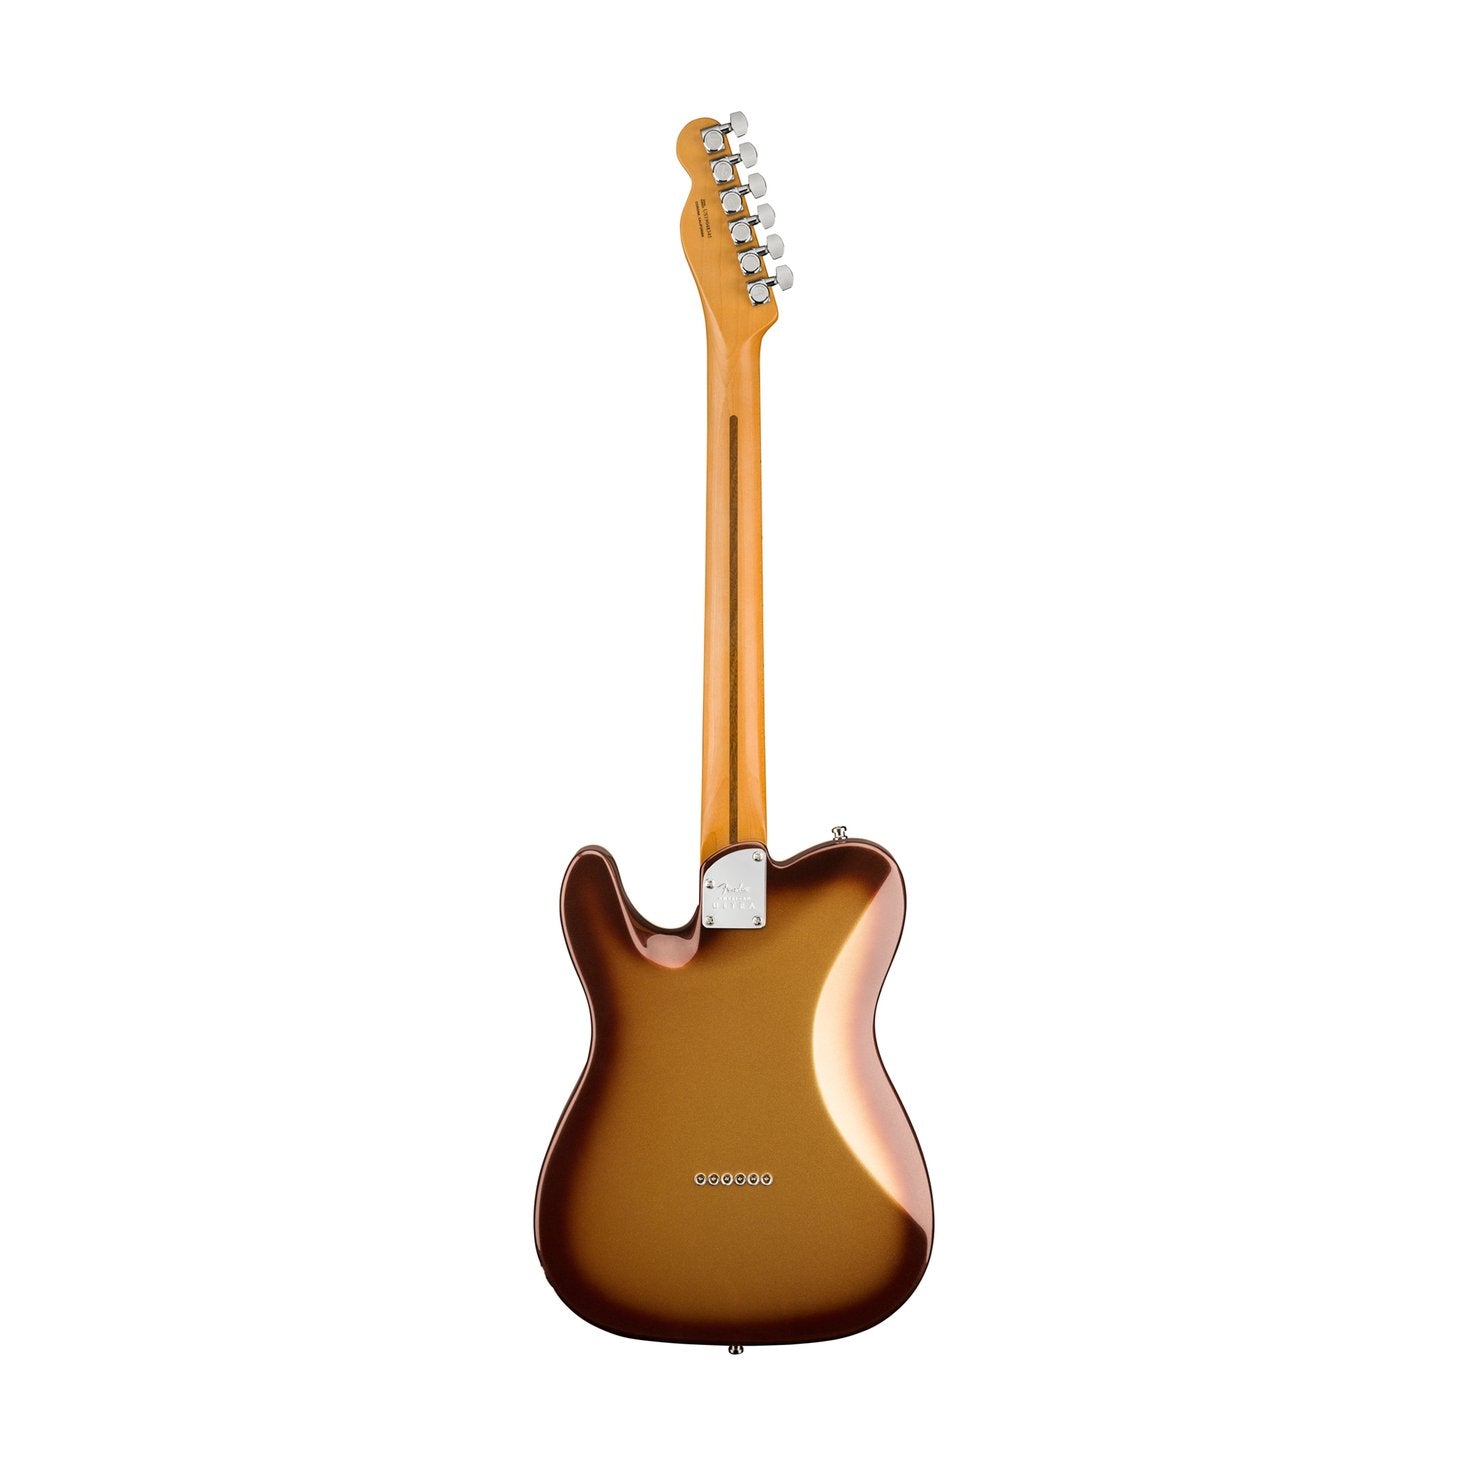 Fender American Ultra Telecaster Electric Guitar, Maple FB, Mocha Burst, FENDER, ELECTRIC GUITAR, fender-electric-guitar-f03-011-8032-732, ZOSO MUSIC SDN BHD